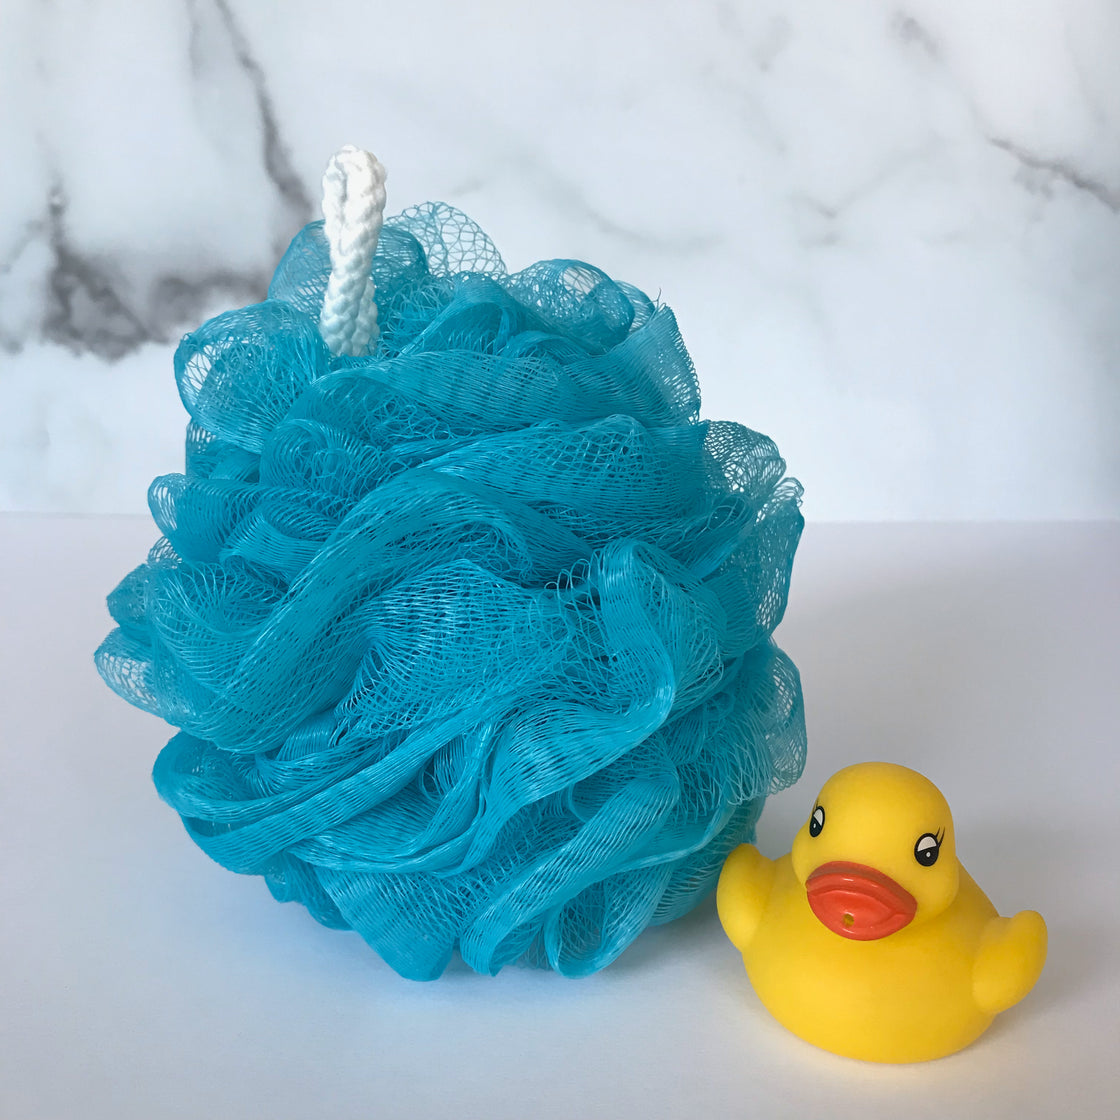 A turquoise rengora mesh scrubber accompanied by a yellow rubber duck, all set against a plain white background